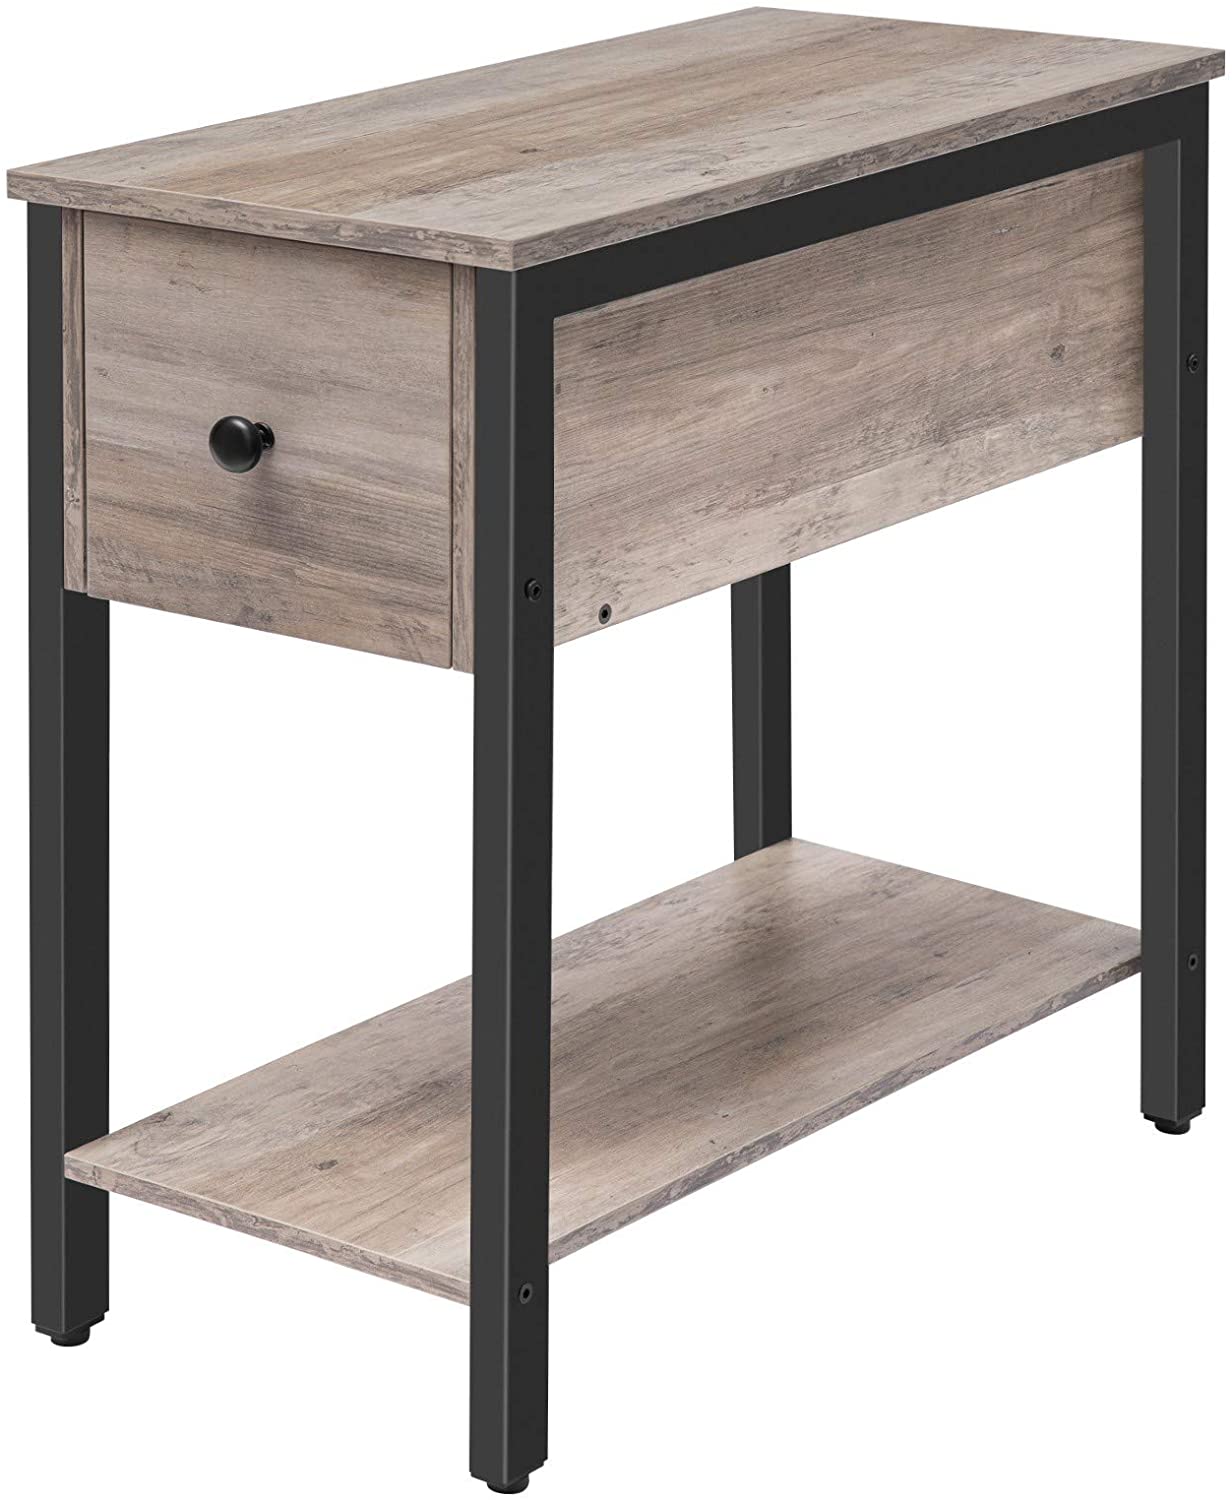 Side Tables Small Spaces, Stable and Sturdy Construction, Wood Look Accent Furniture, Greige and Black